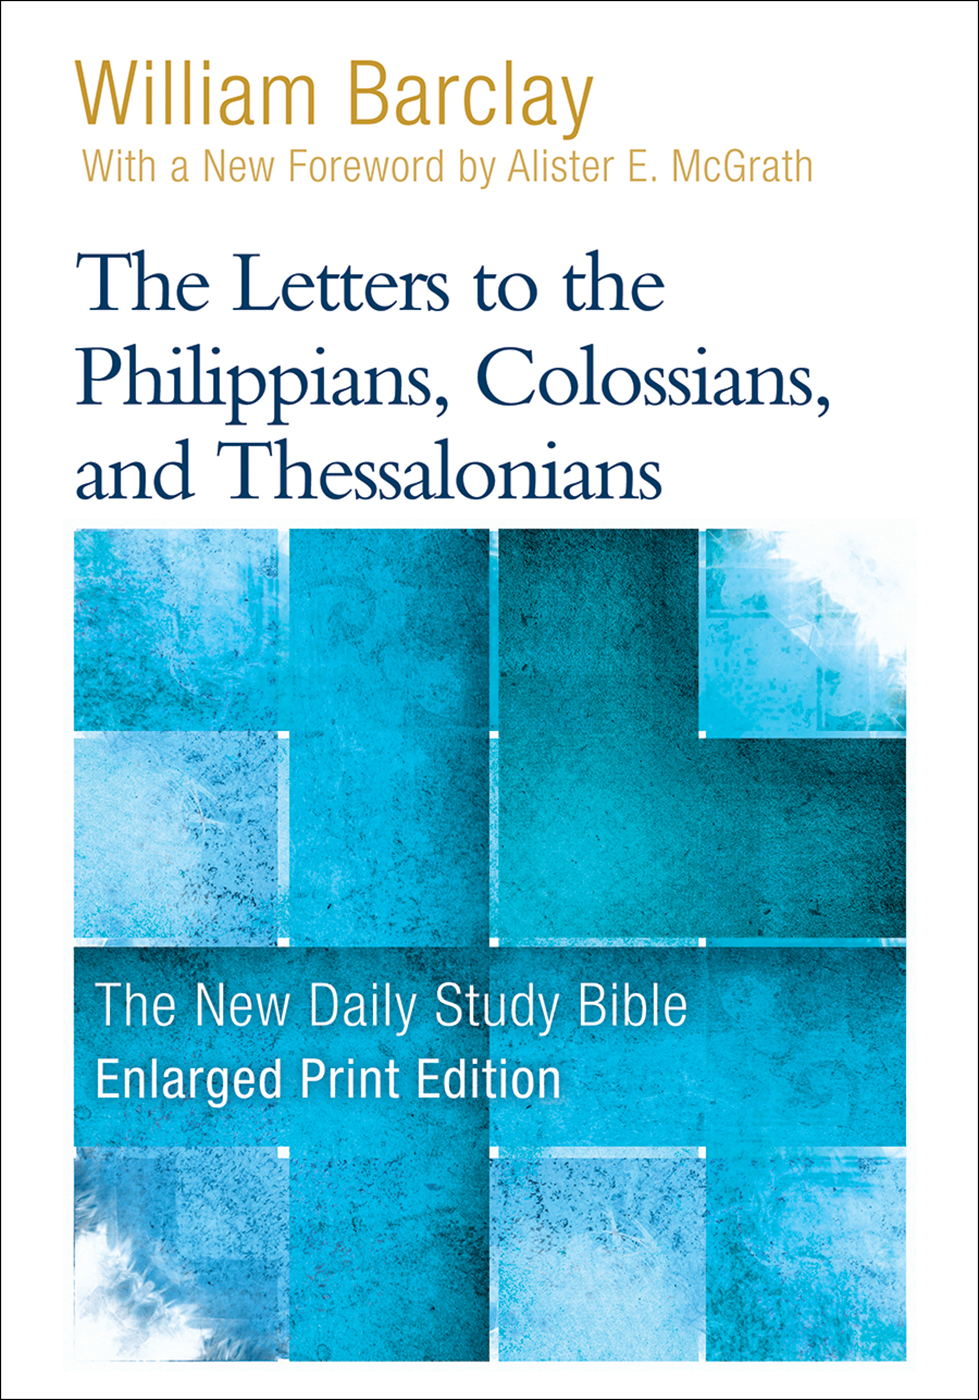 The Letters to the Philippians, Colossians, and Thessalonians-Enlarged